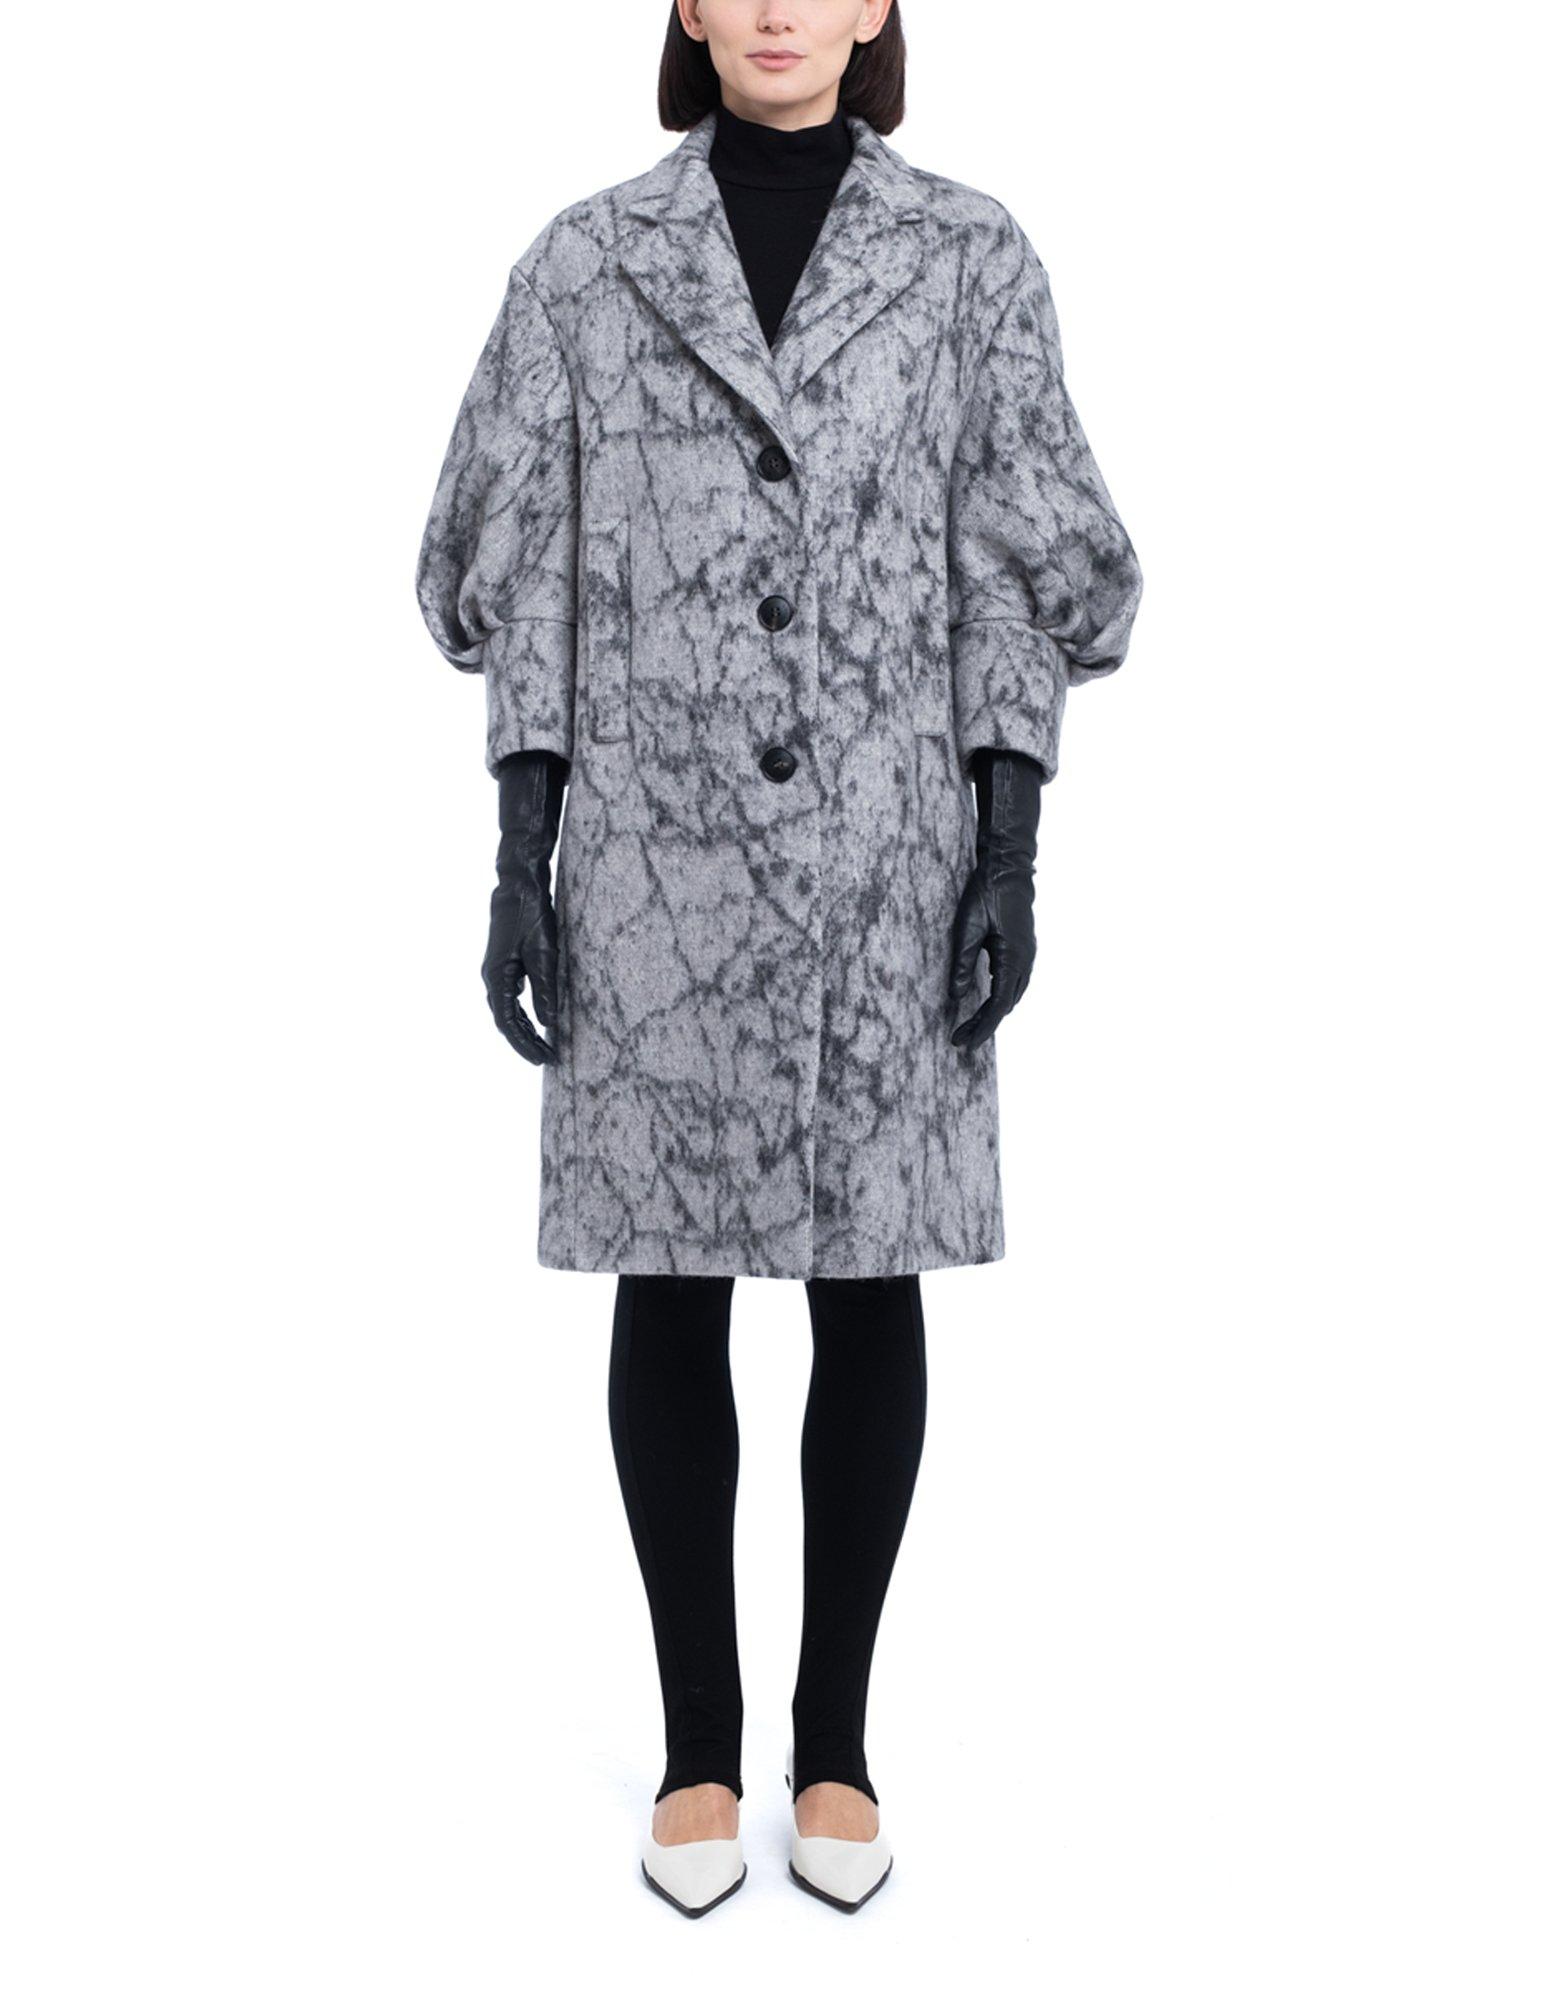 Manuela Conti Marble-effect Print Wool and Cashmere Coat 48 IT at